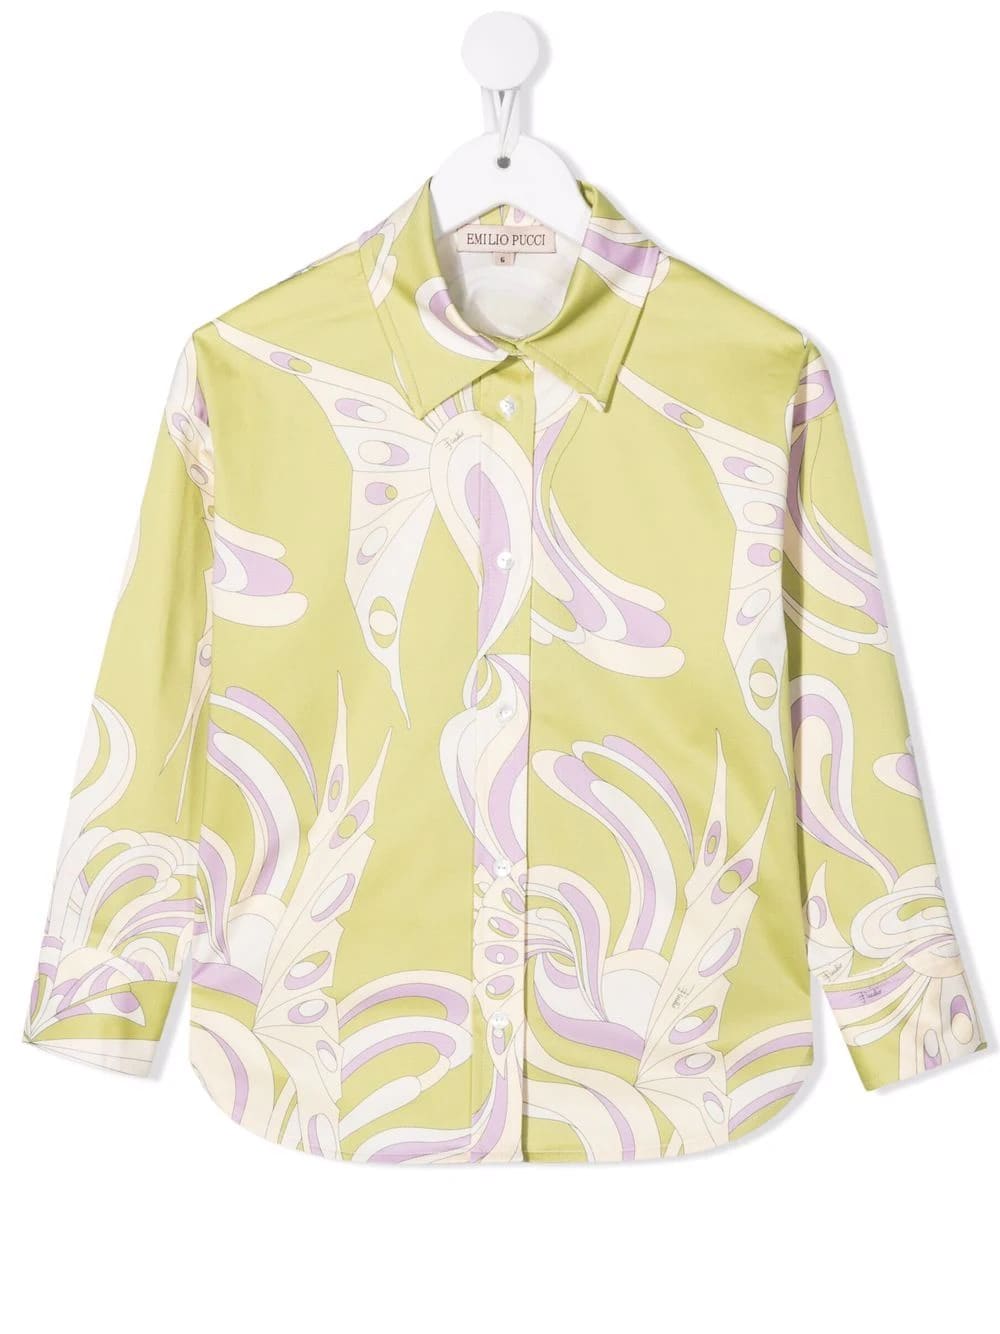 Emilio Pucci Kids Light Green Shirt With Lilac And White Fantasy Print